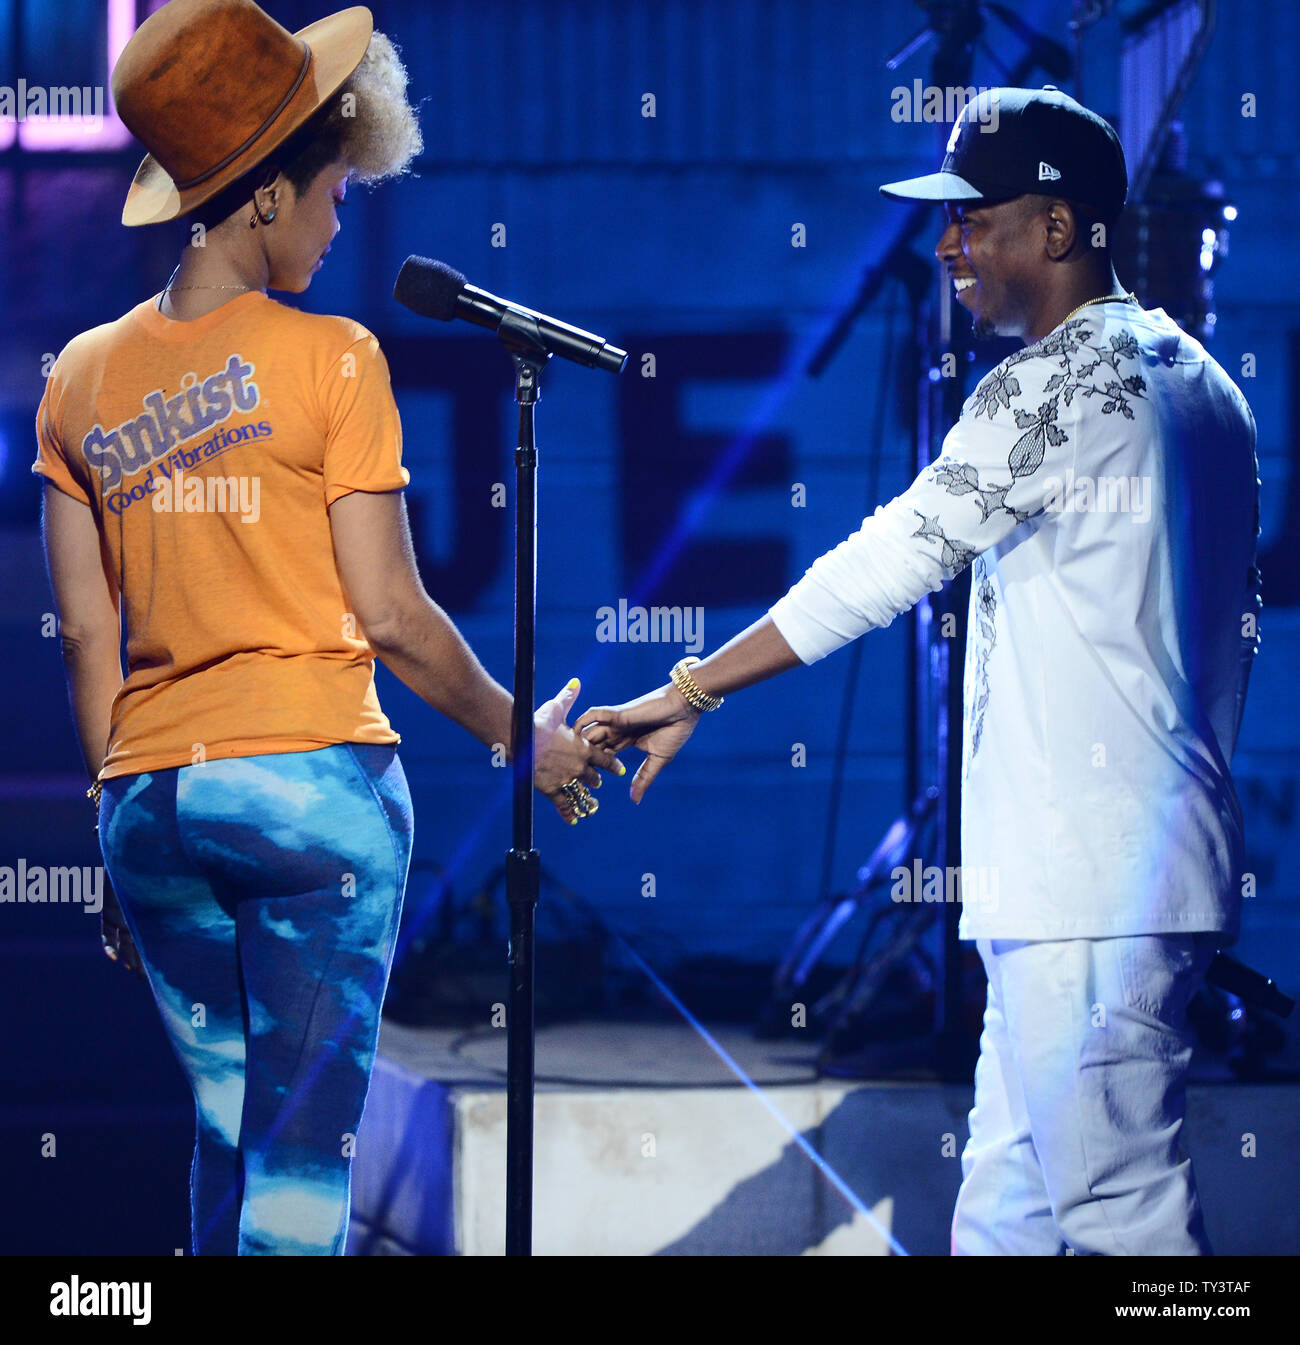 Singers Erykah Badu (L) and Kendrick Lamar perform on stage during BET  Awards 13, at the Nokia Theatre in Los Angeles on June 30, 2013. UPI/Jim  Ruymen Stock Photo - Alamy